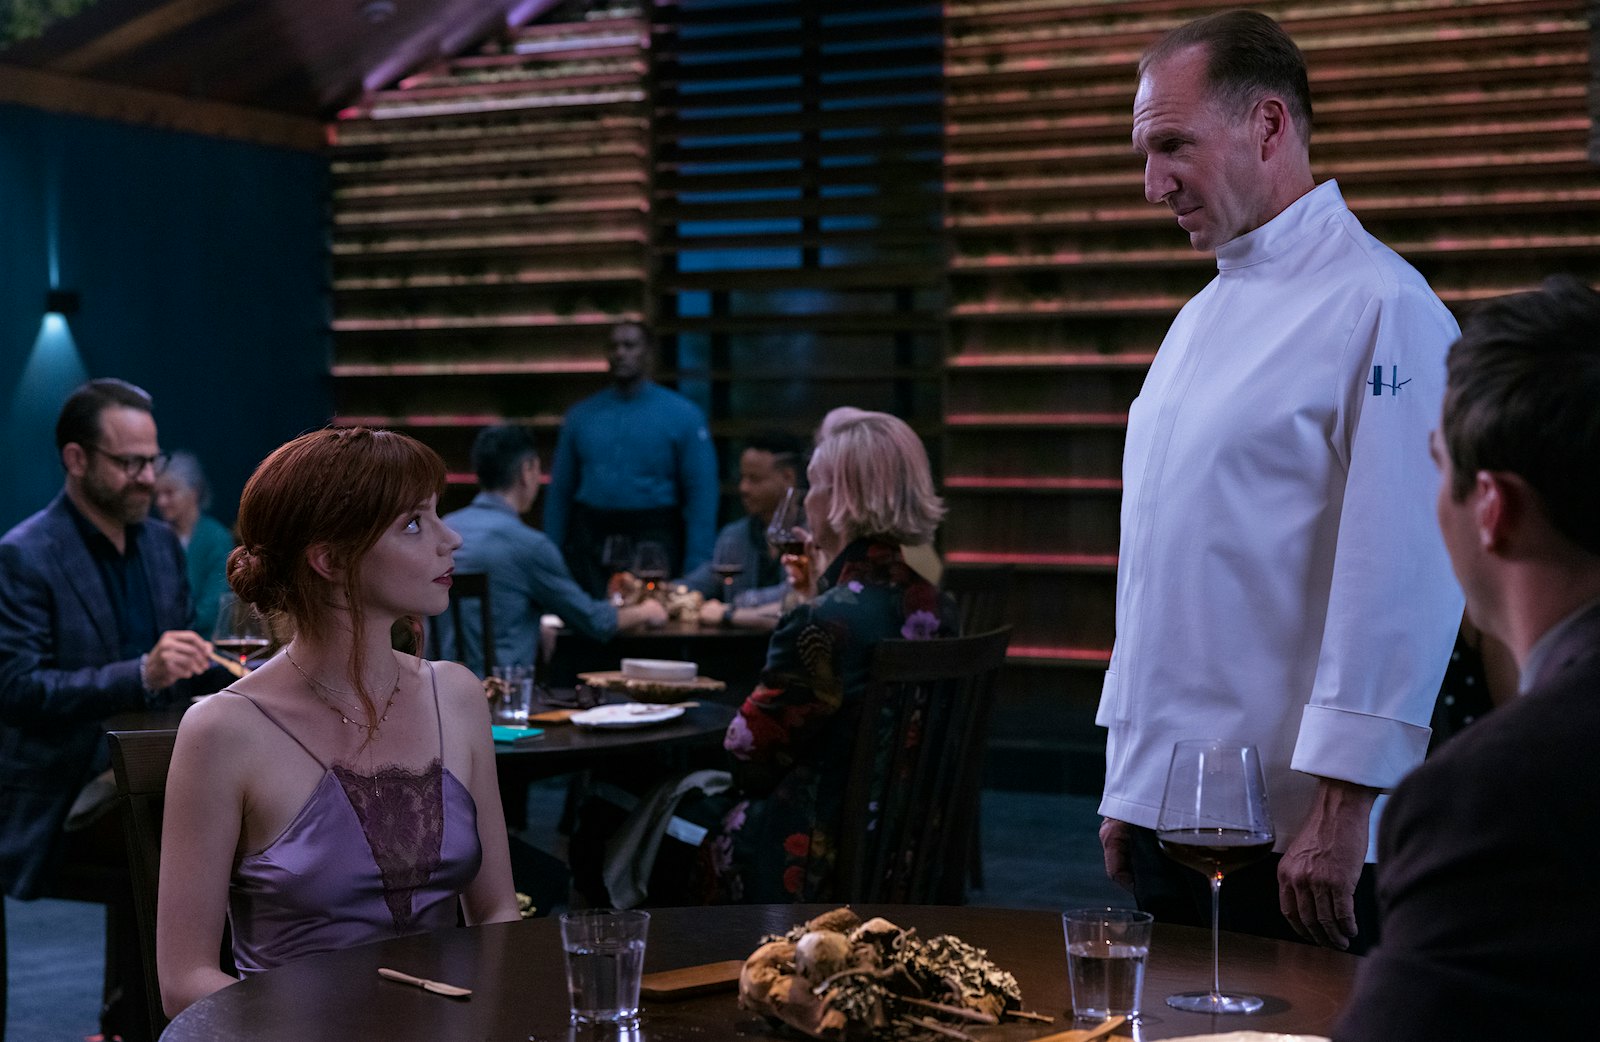  In the film The Menu, a couple played by Anya Taylor-Joy and Nicholas Hoult travels to a coastal island to eat at an exclusive restaurant where the chef, played by Ralph Fiennes, has prepared a lavish menu with some shocking surprises.